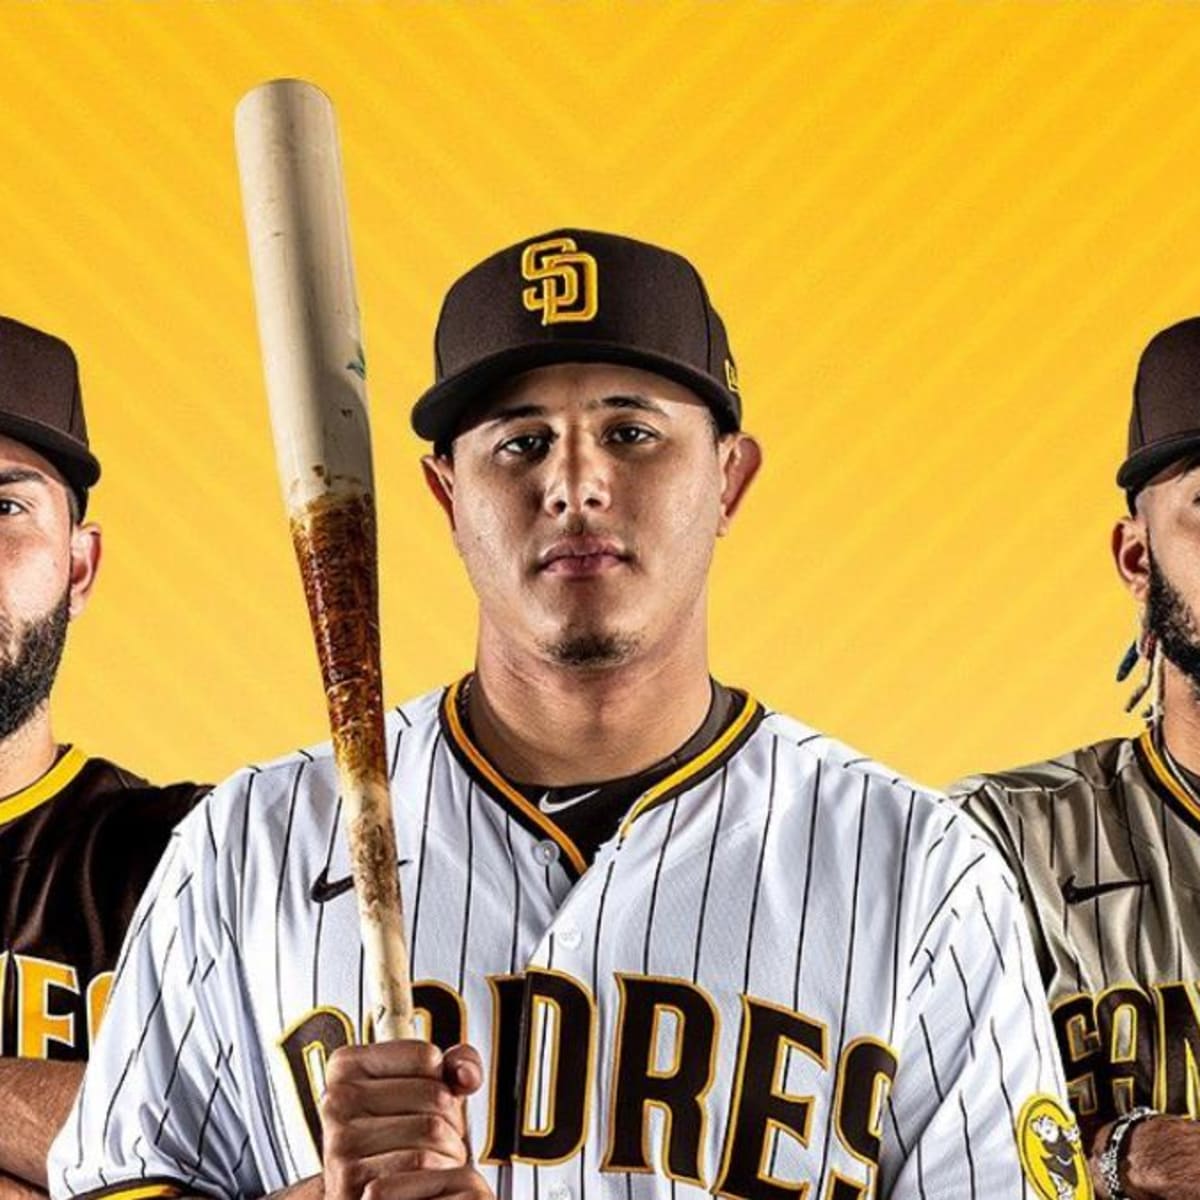 Reviewing the New San Diego Padres Alternate Uniforms